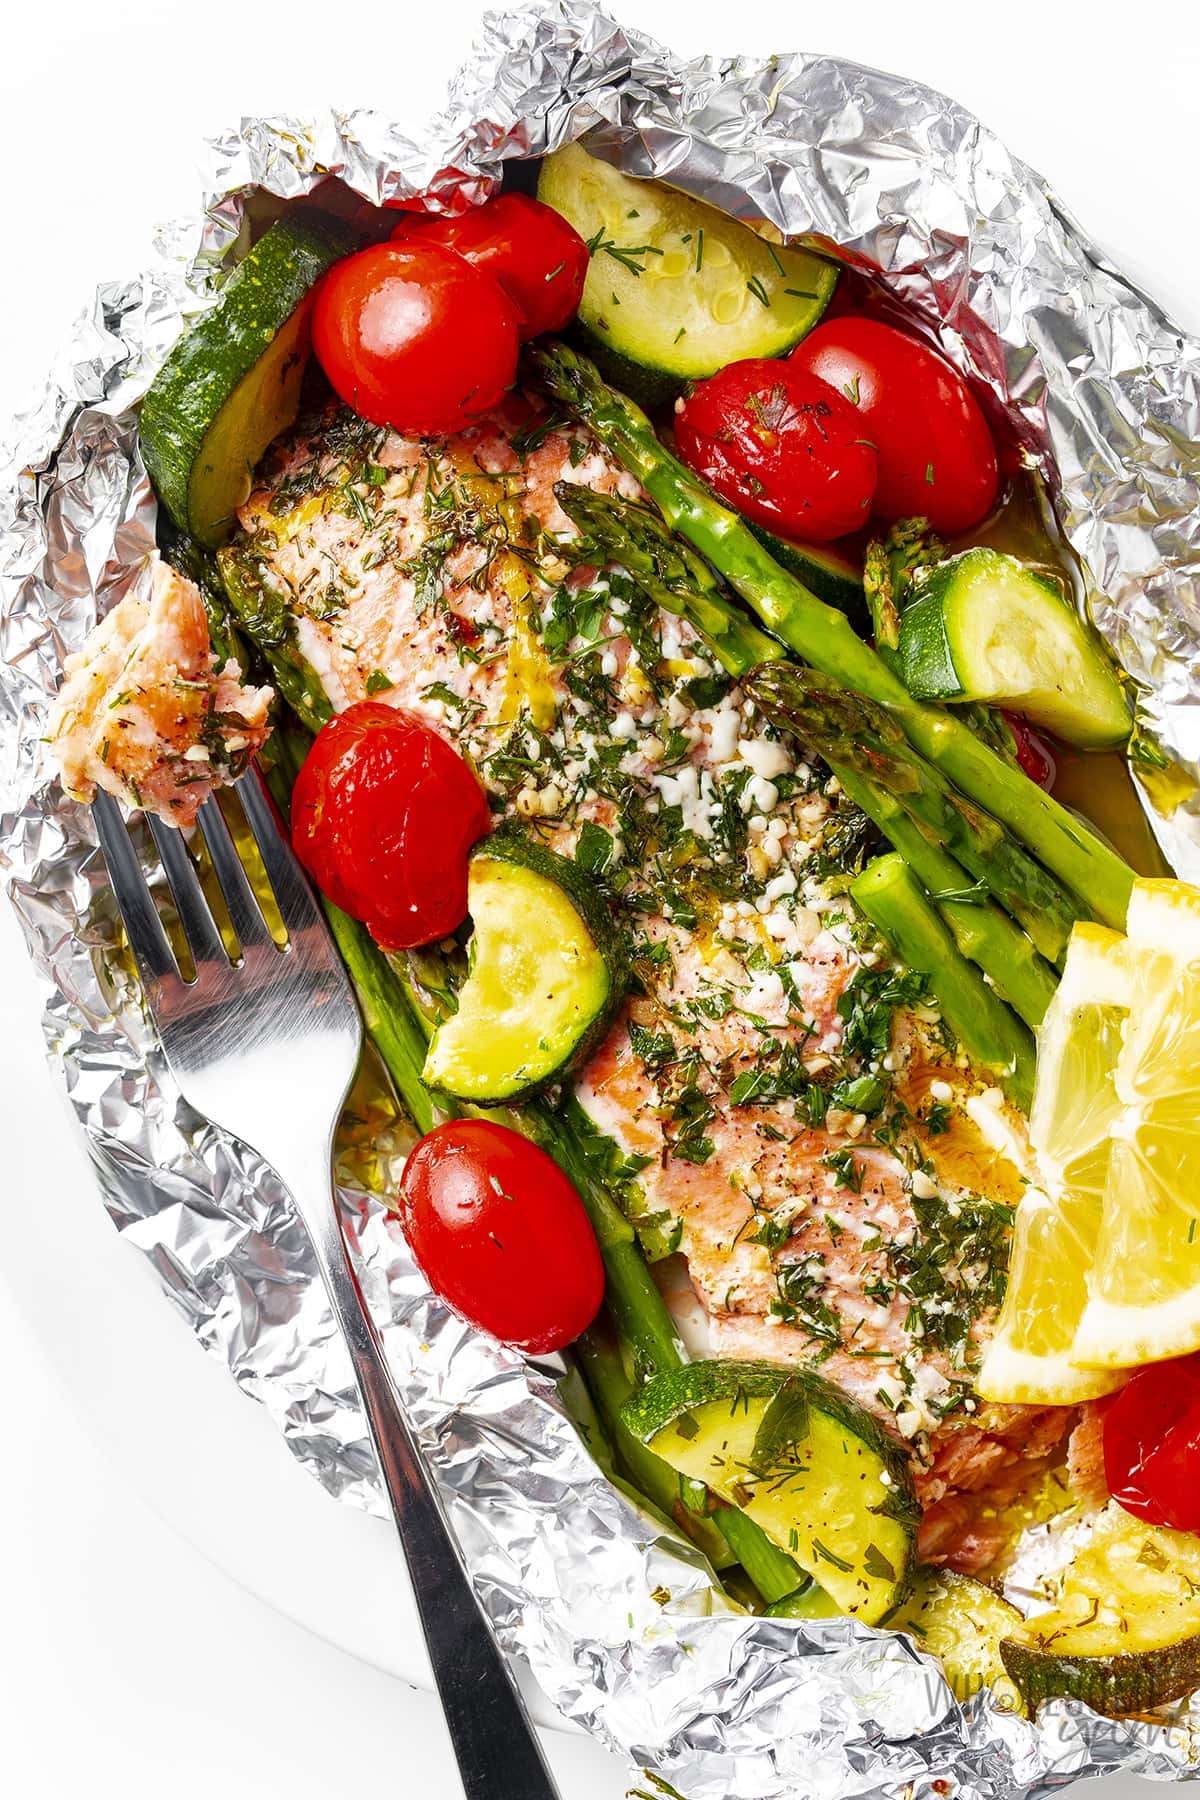 Oven baked salmon in foil with zucchini, asparagus, and tomatoes, and one bite of salmon on a fork.